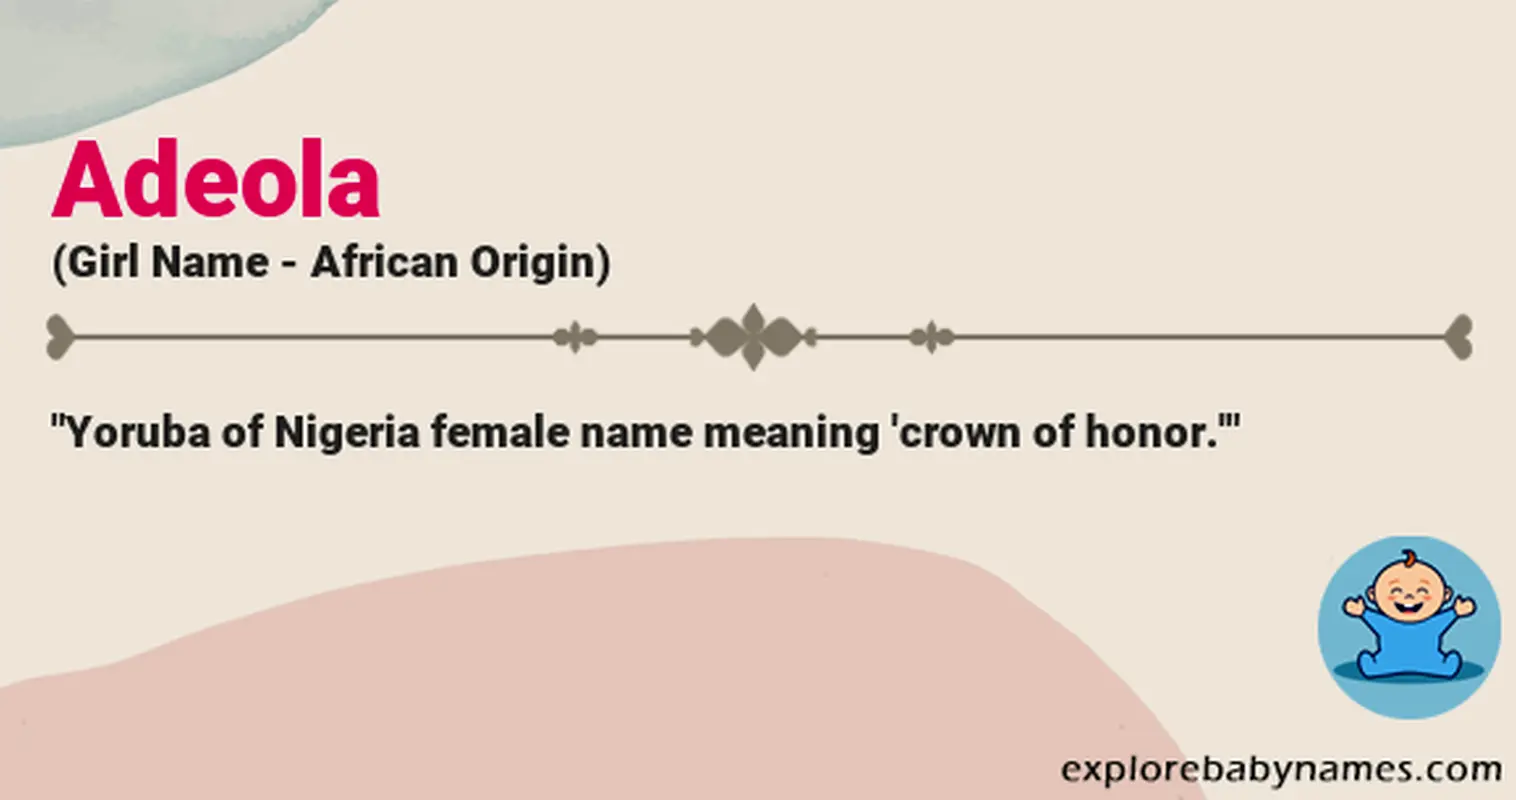 Meaning of Adeola